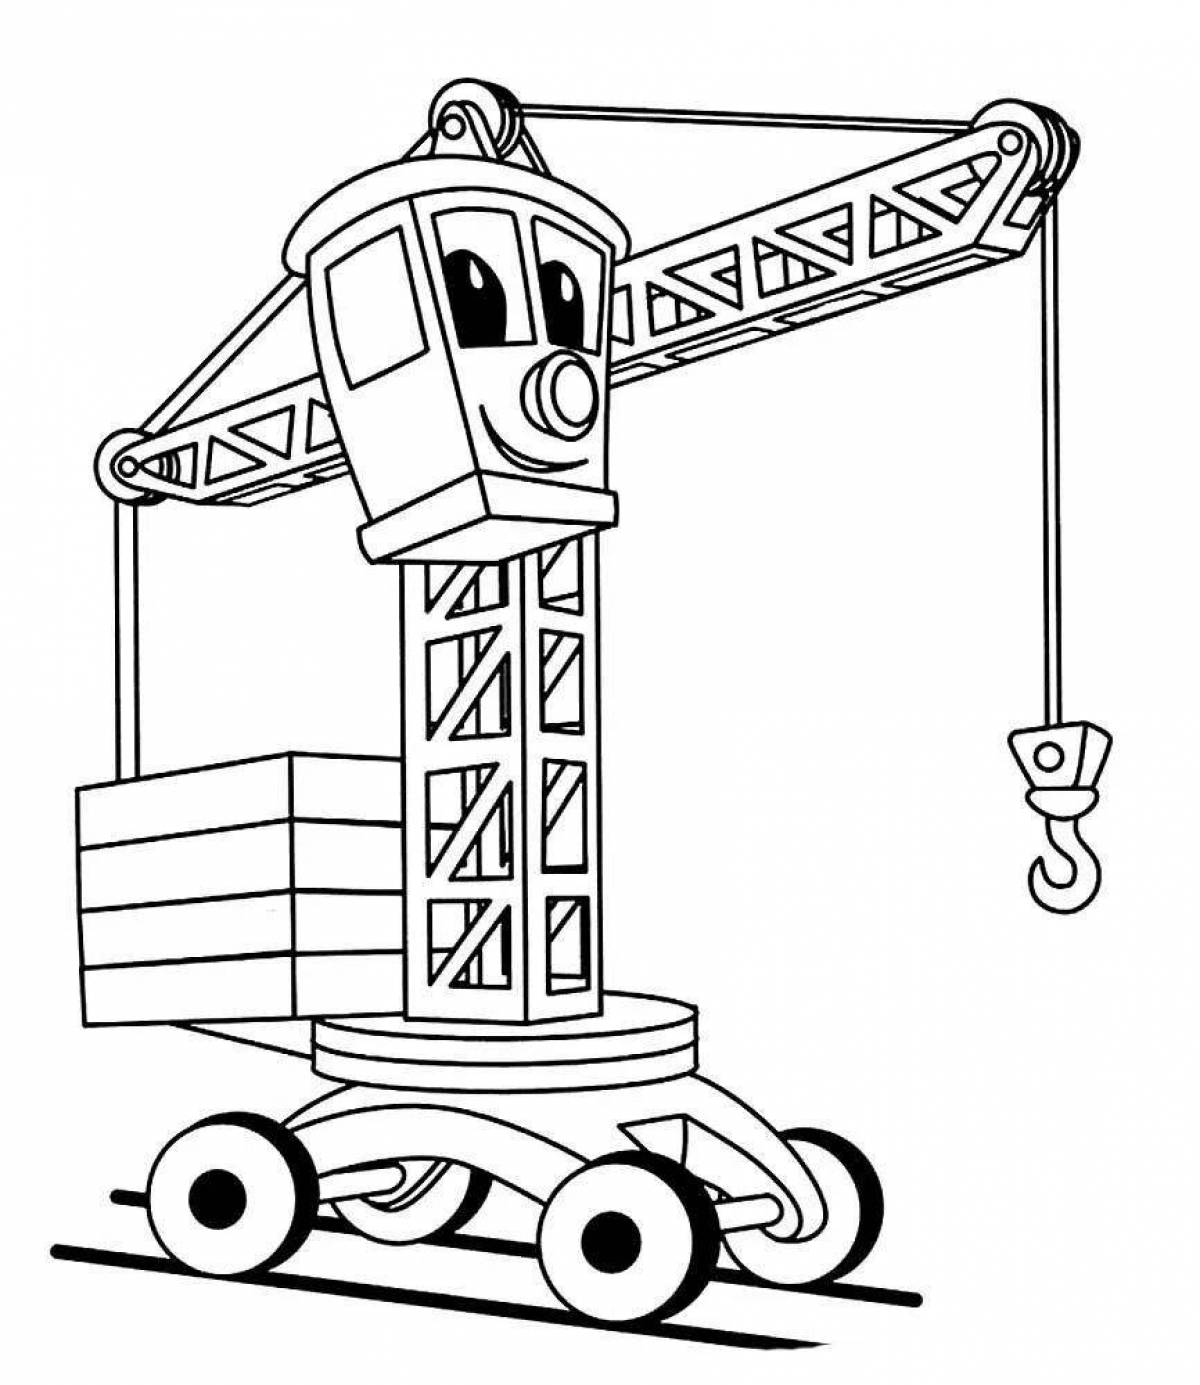 Great construction machinery coloring page for the little ones